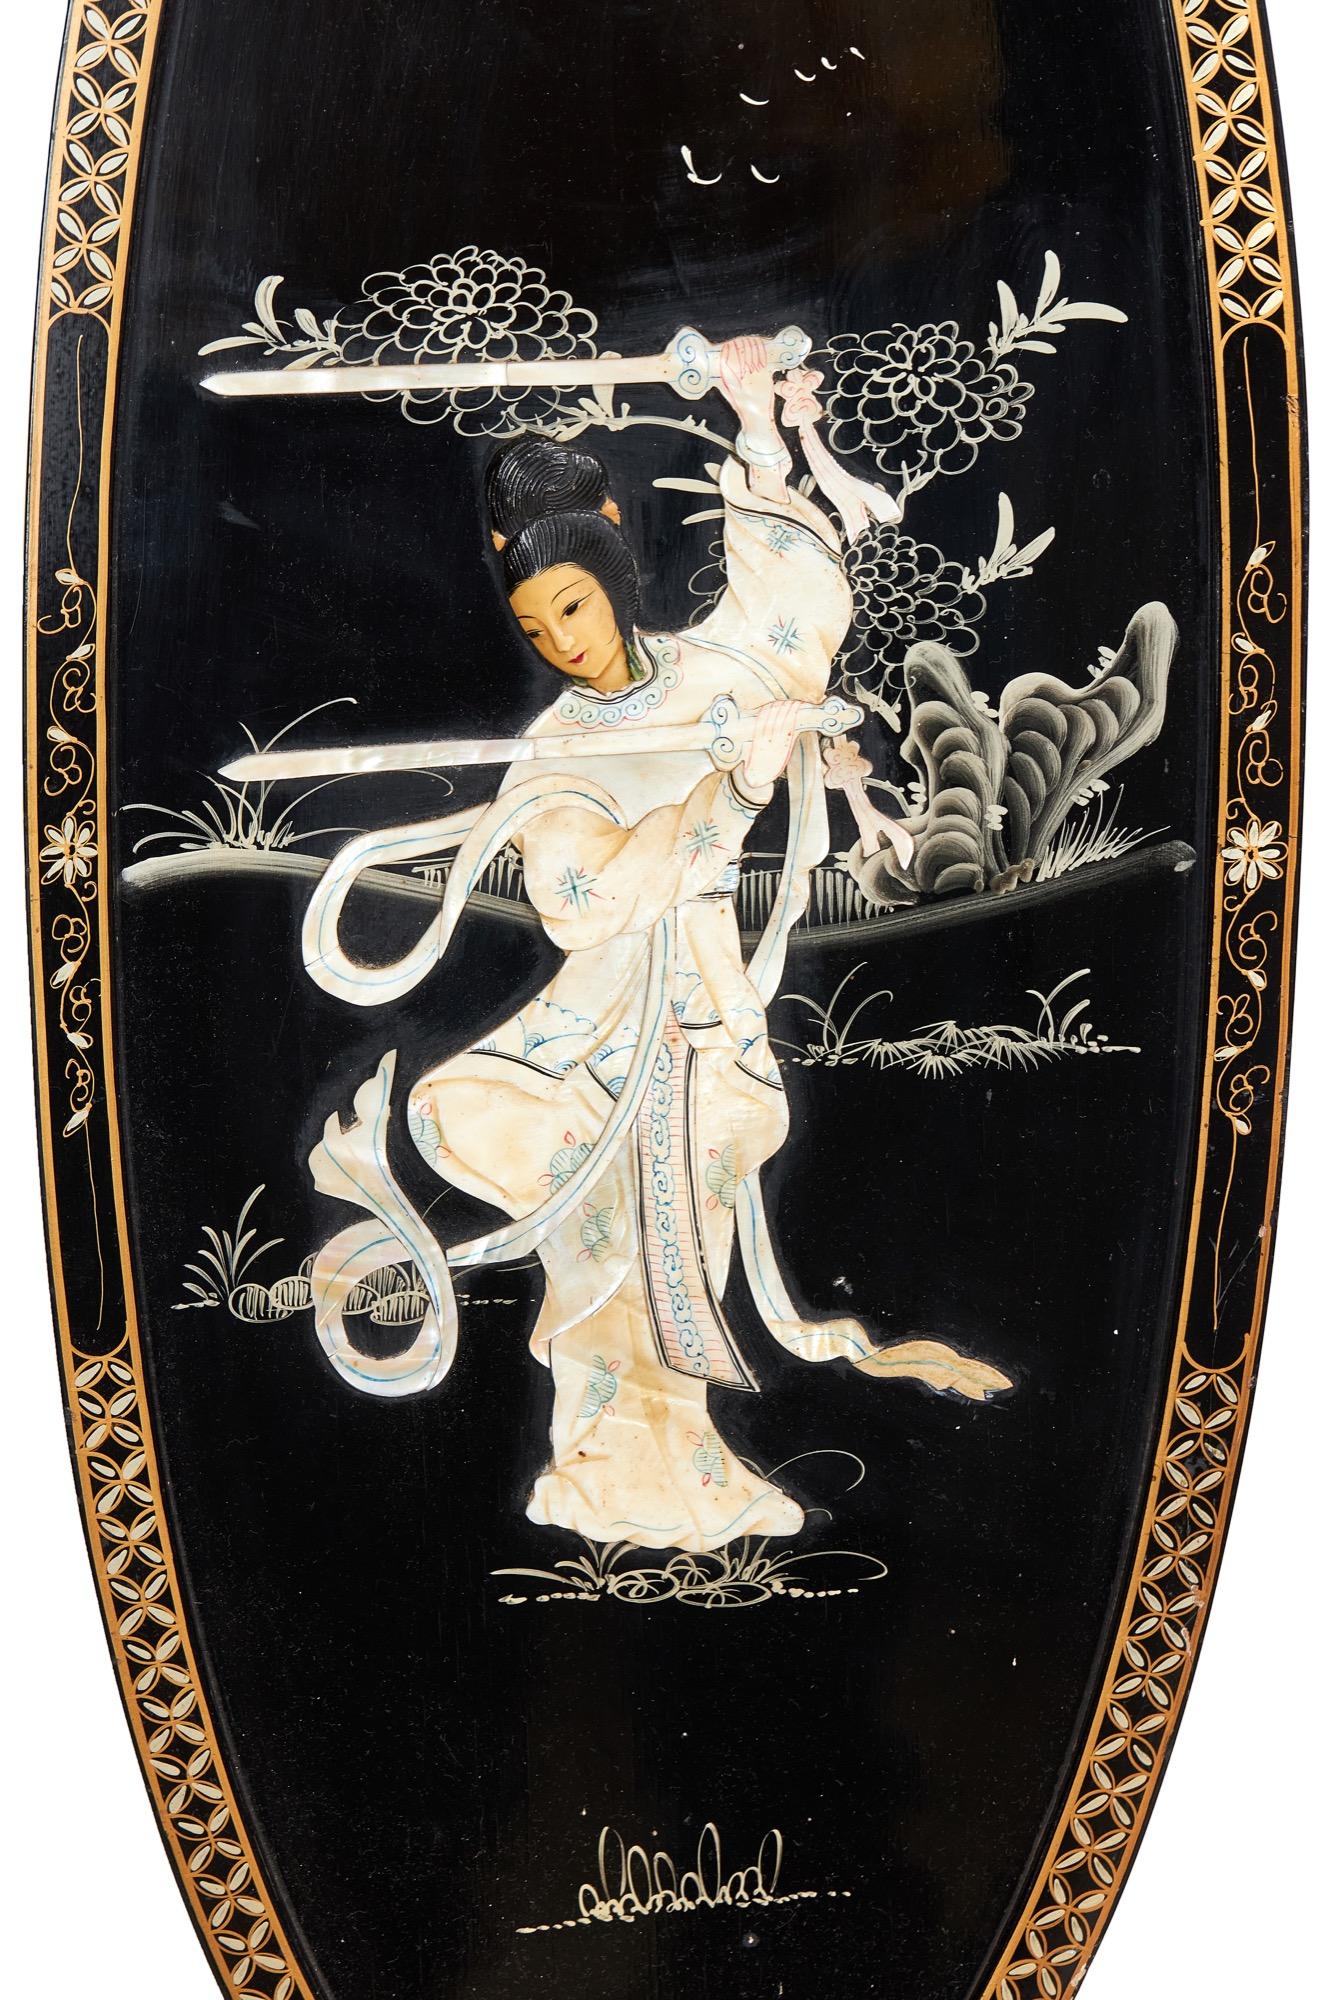 Pair chinoiserie decorated wall panels, circa 1930s
Black & gold detail
Depicting Lady Warrior, with overlaid mother of pearl.
Trees & foliage in the background
Art Deco Design screw hook
Good Original Condition.